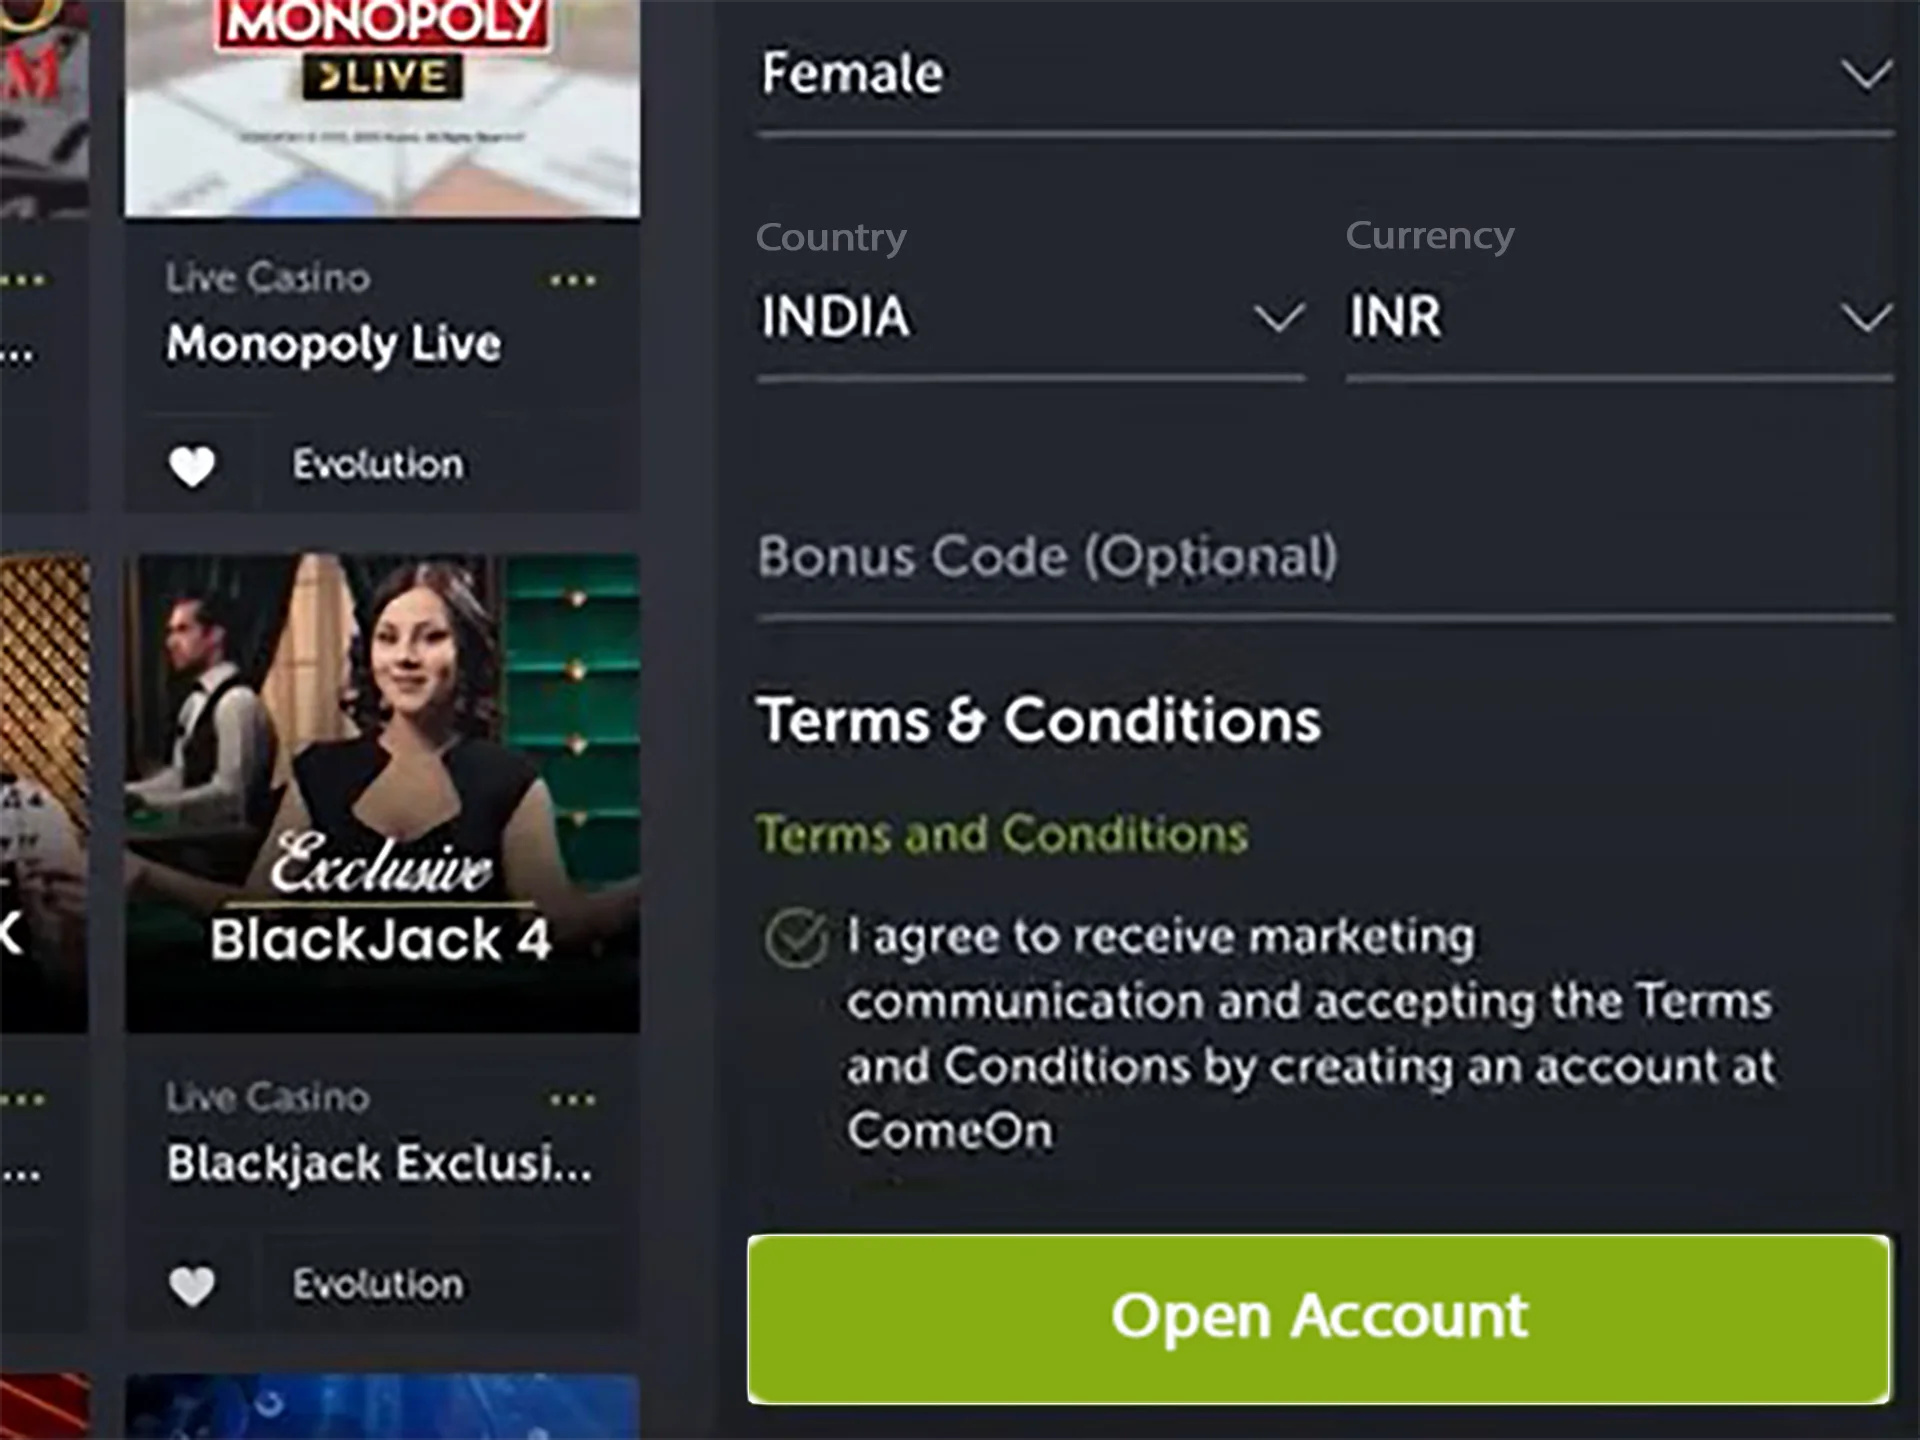 Complete the process of creating your ComeOn account.